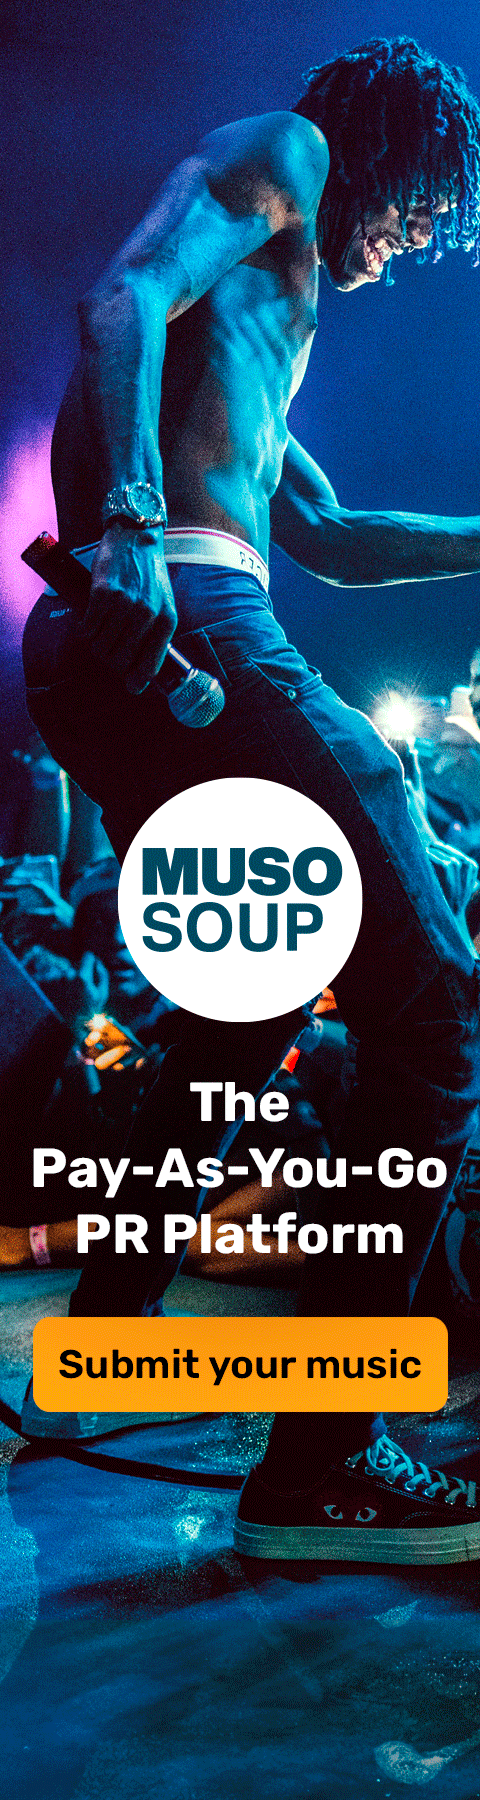 Musosoup: Submit Your Music